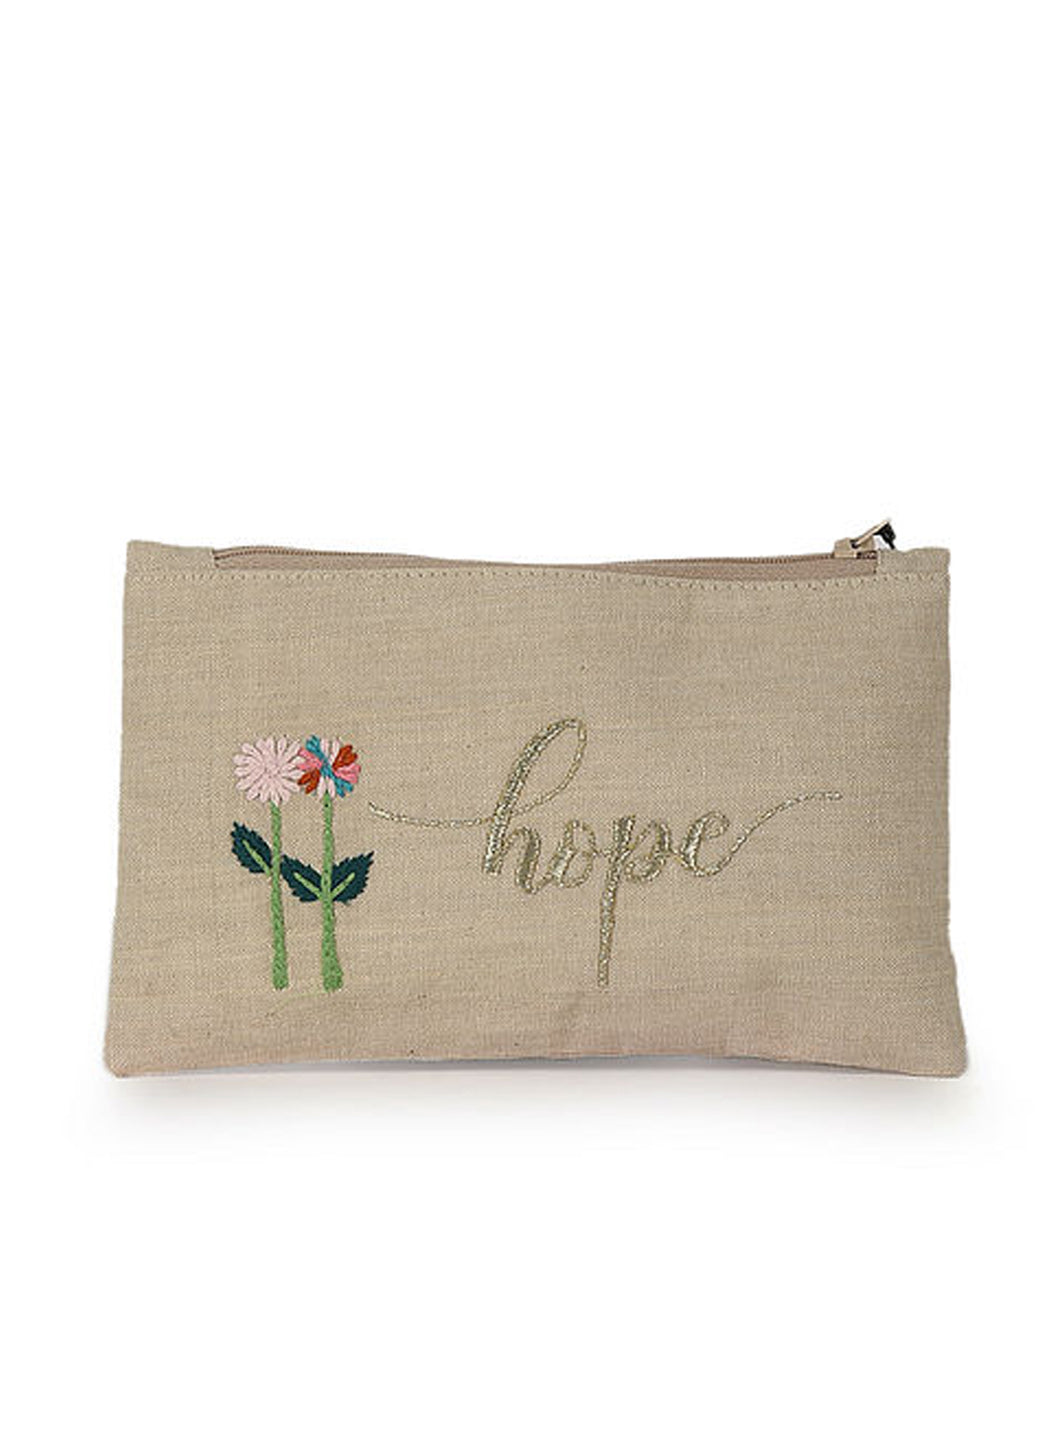 Kanyoga Cotton Pouch With ‘Hope’ Embroidered For Women